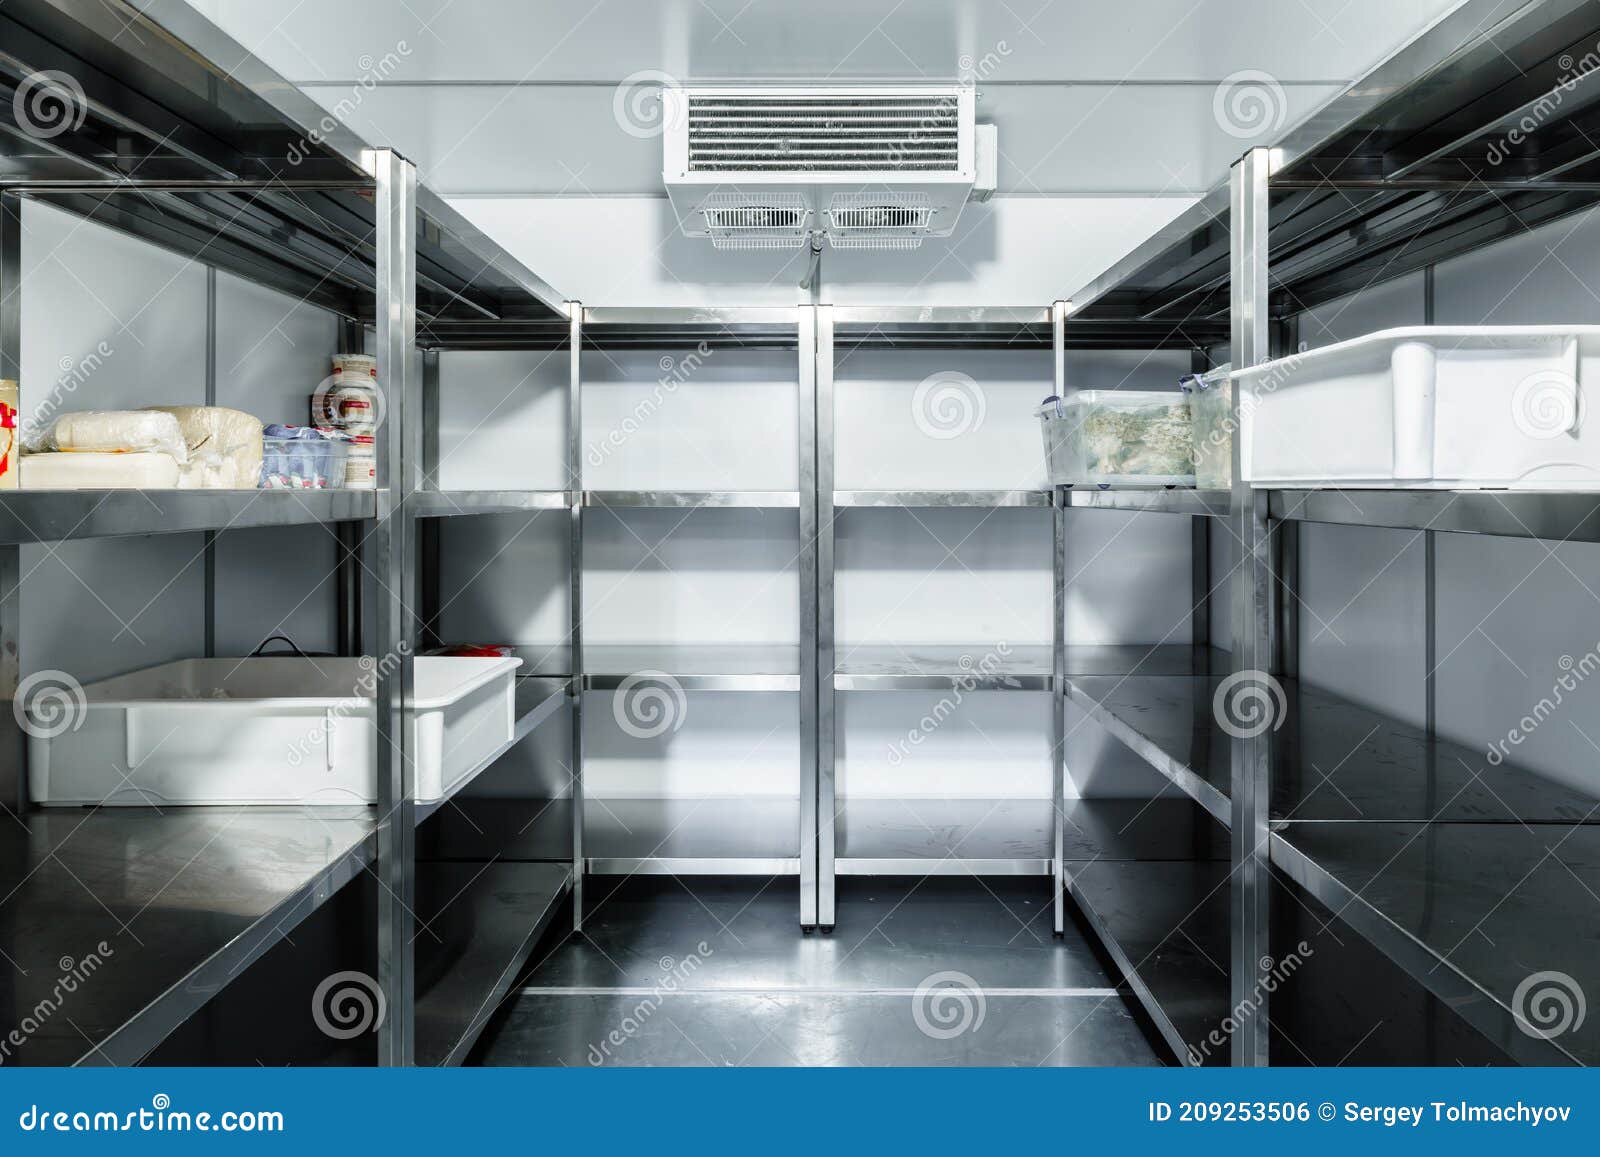 refrigerator chamber with steel shelves in a restaurant